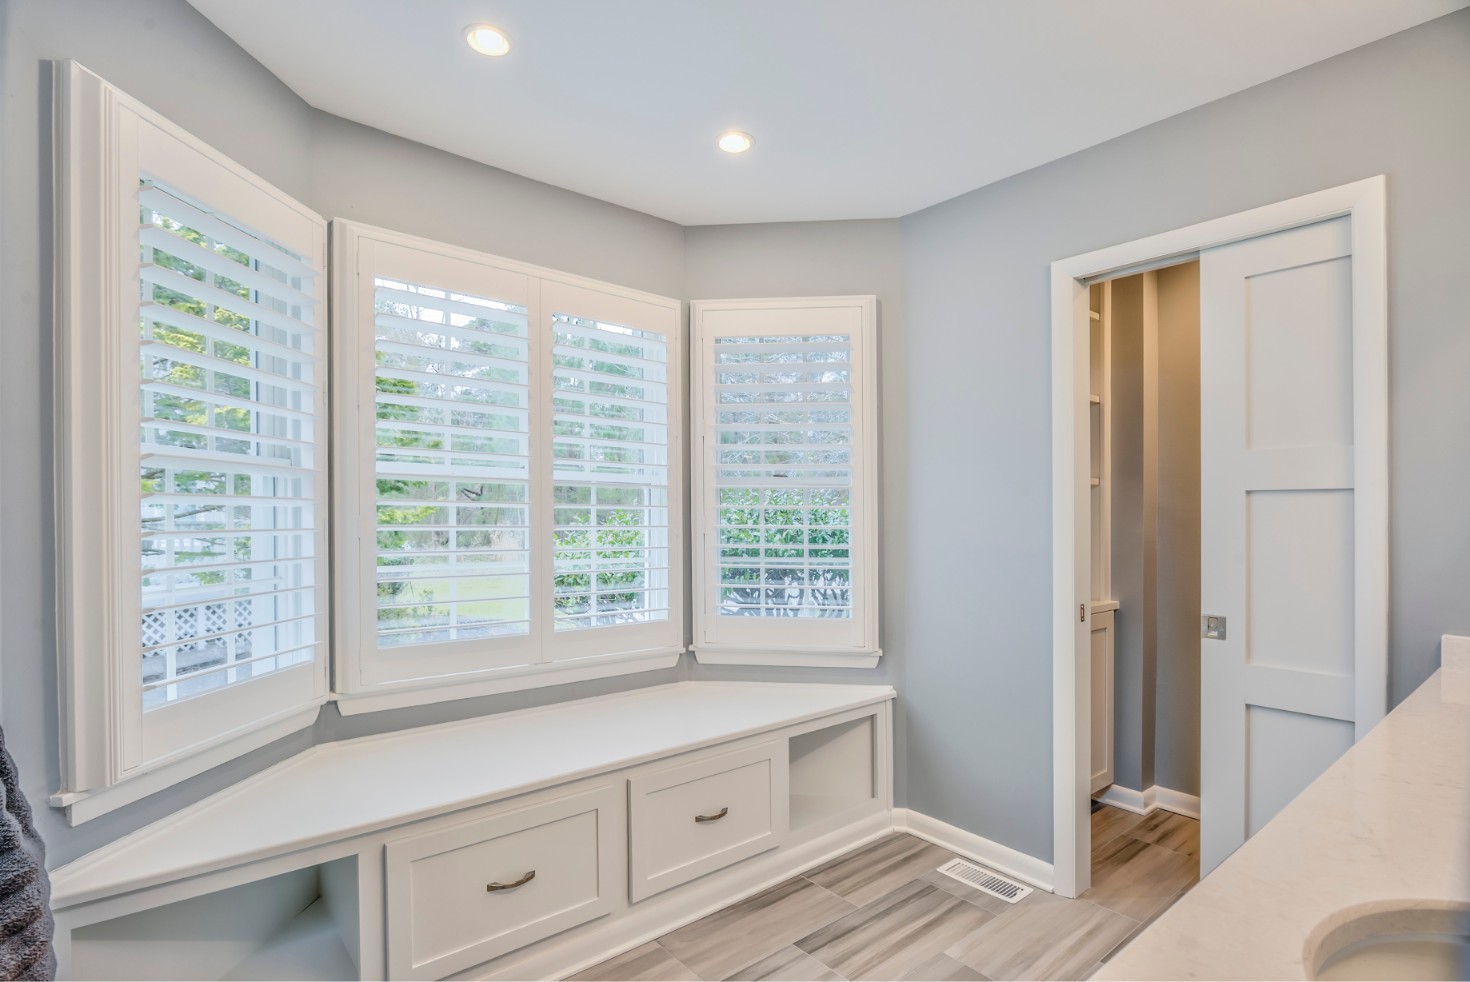 Canal Way Renovation in Bethany Beach DE - Bathroom with Large Window Side Bench Seat